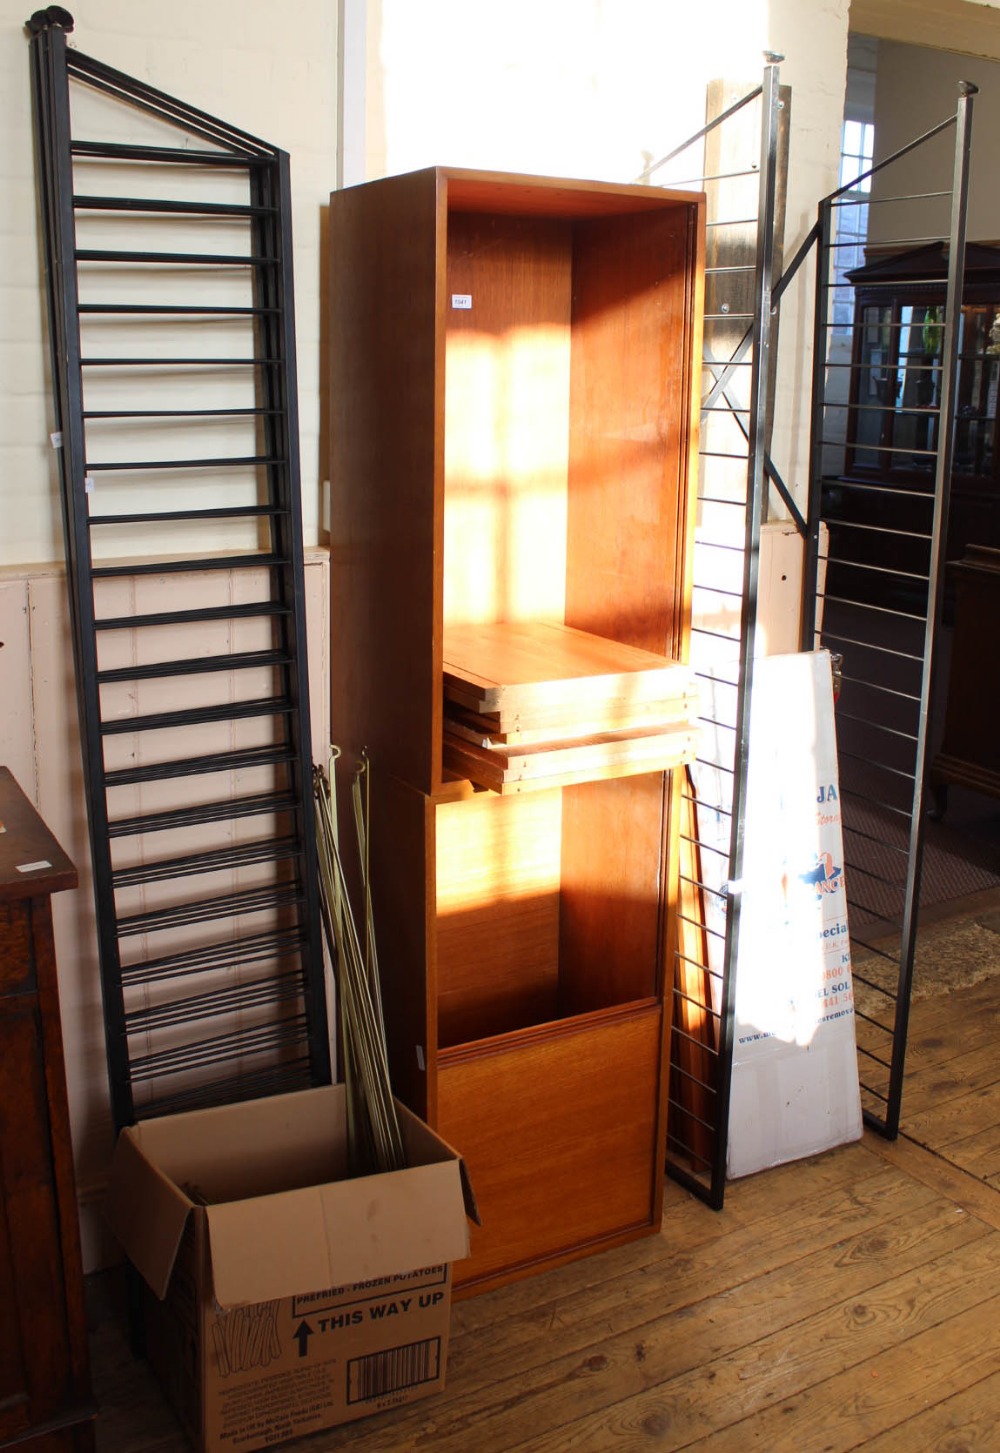 A Ladderax style shelving system with cupboards